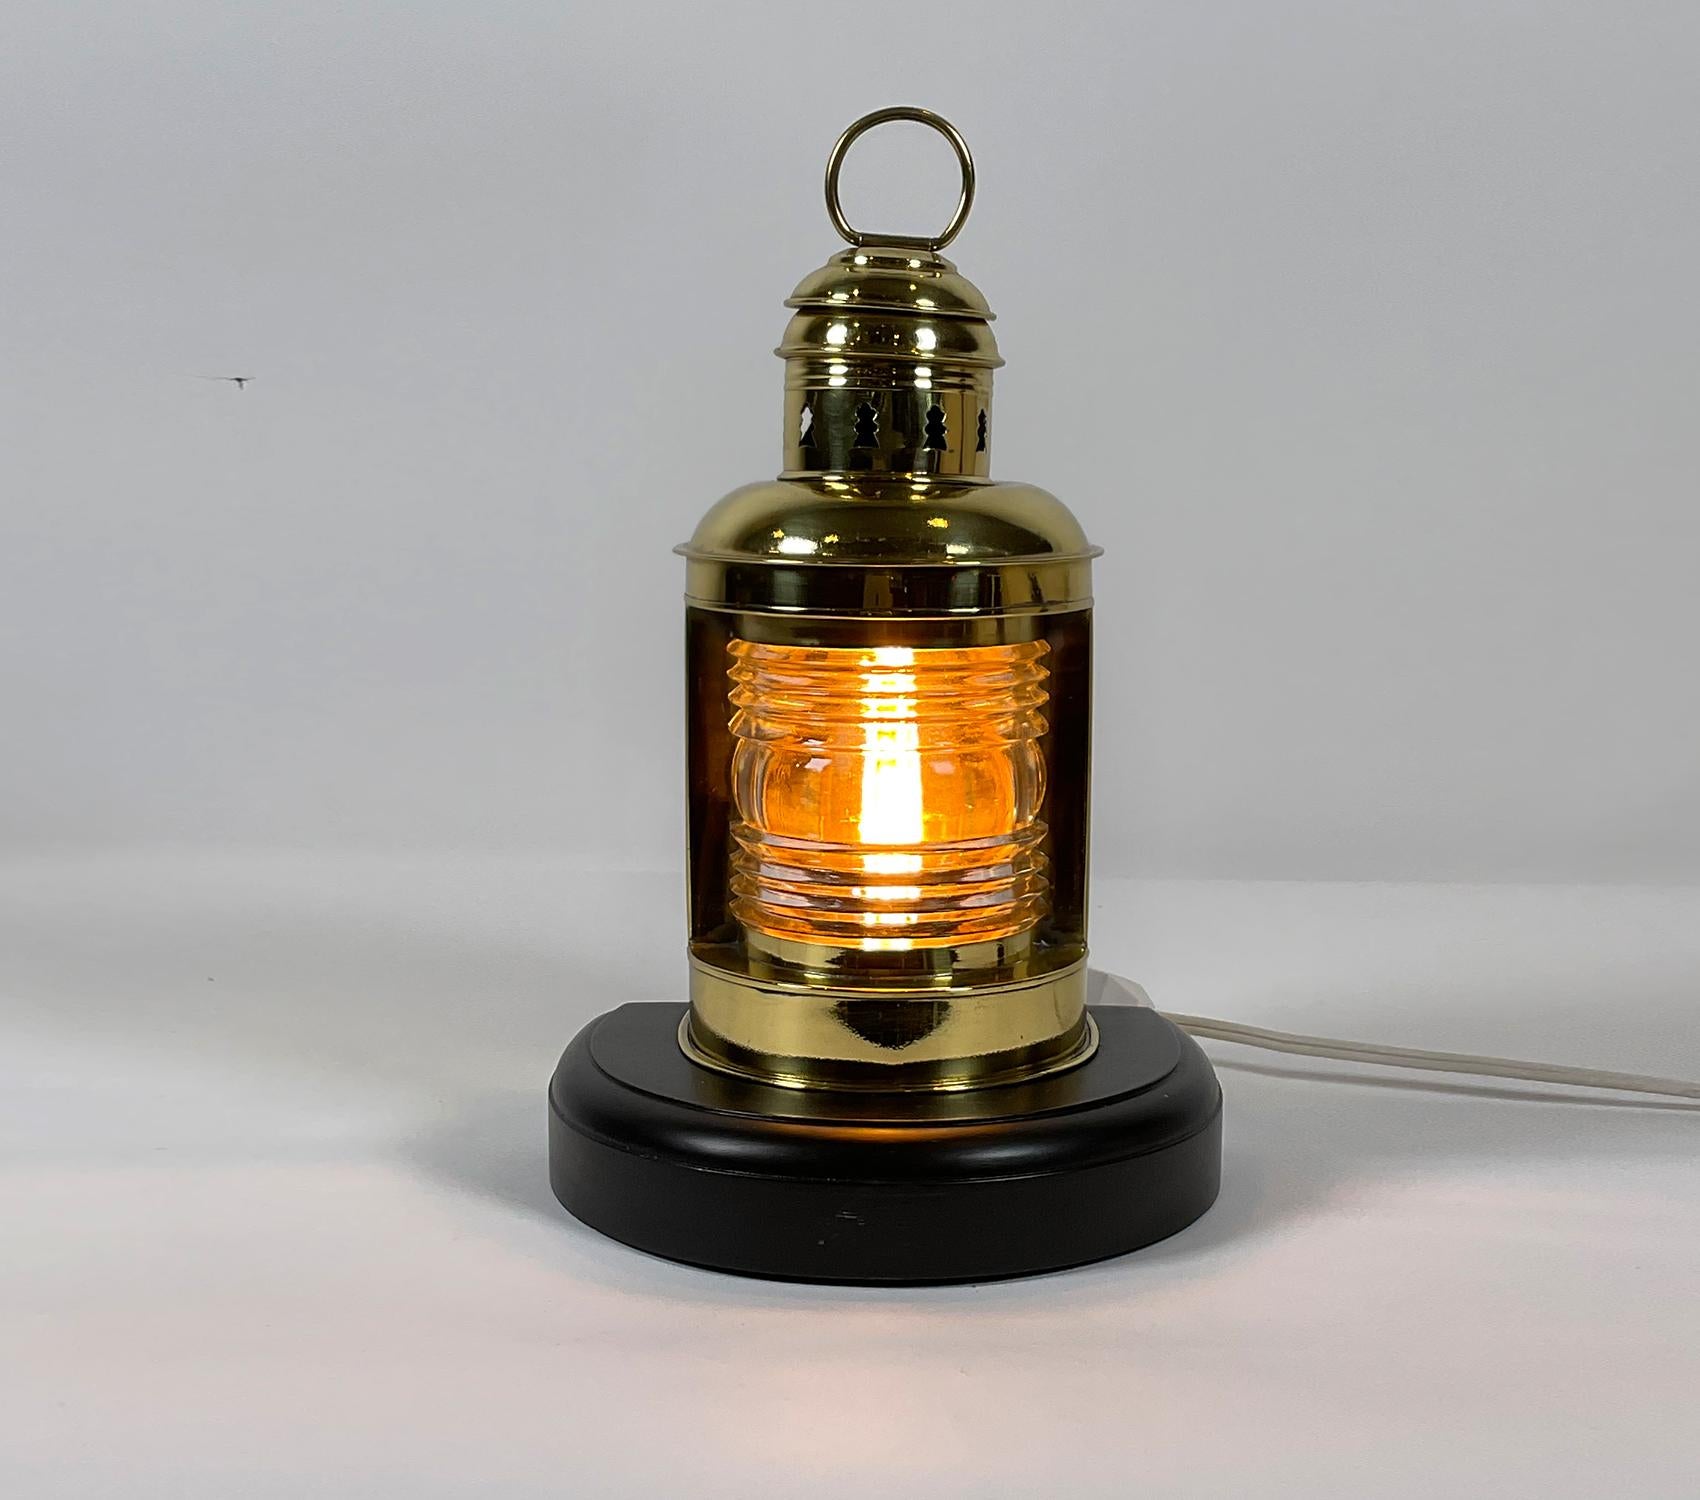 Solid brass ship or boat bow lantern by Perkins Marine Lamp Corporation of Brooklyn, New York. With Fresnel lens, vented top and carry ring. Mounted to a mahogany base. This marine lantern has been rewired with a new socket for home use.

Weight: 4